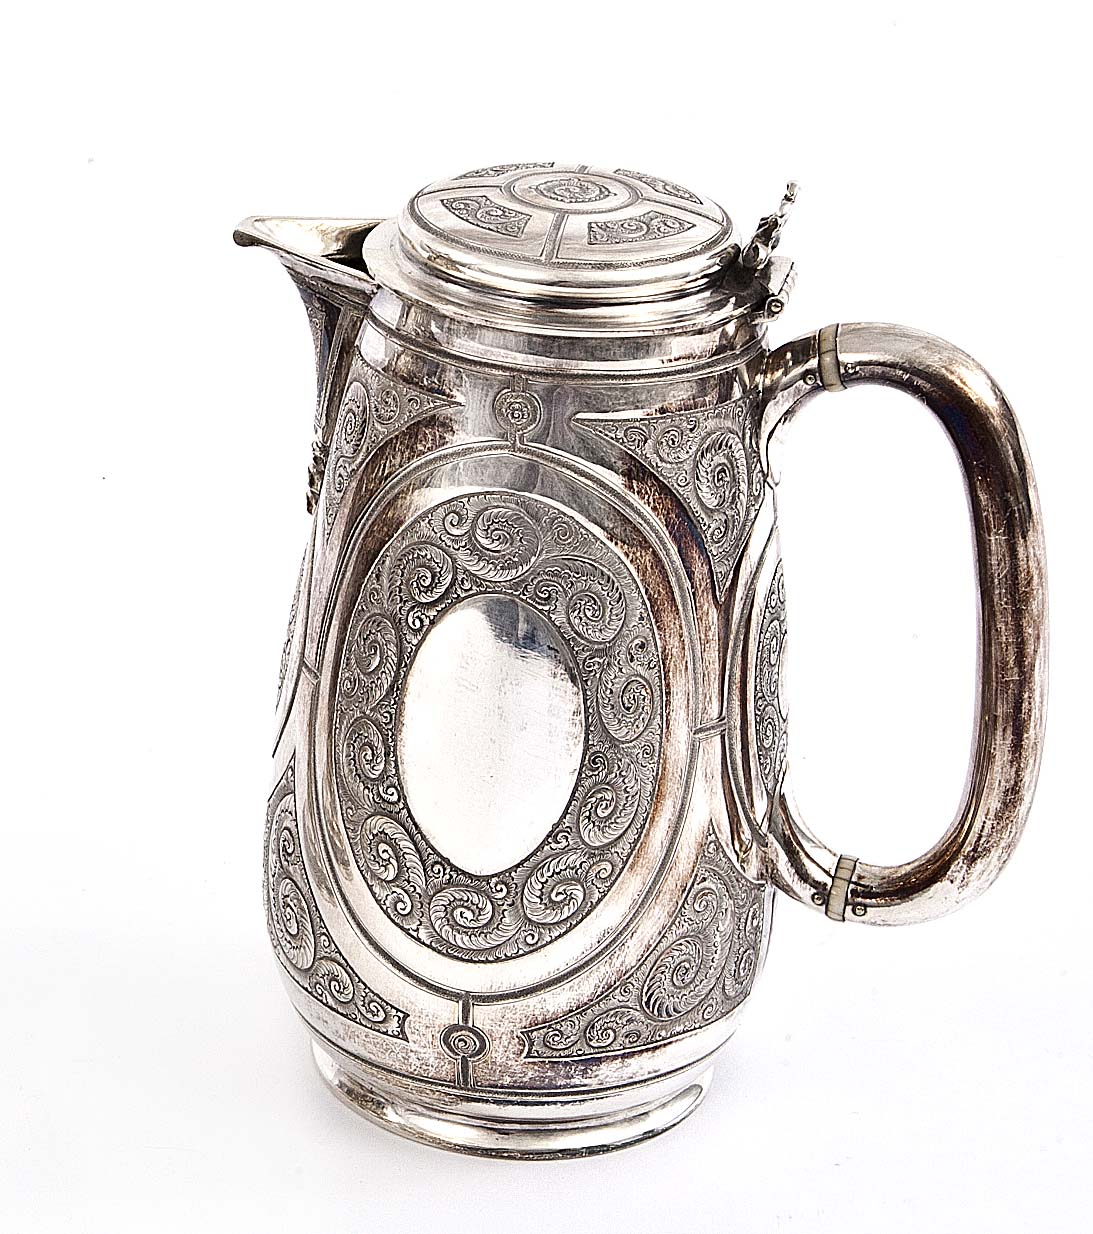 A VICTORIAN SILVER HOT WATER POT, Sheffield 1873, chased with scrolls on geometric panels, 7.5in (